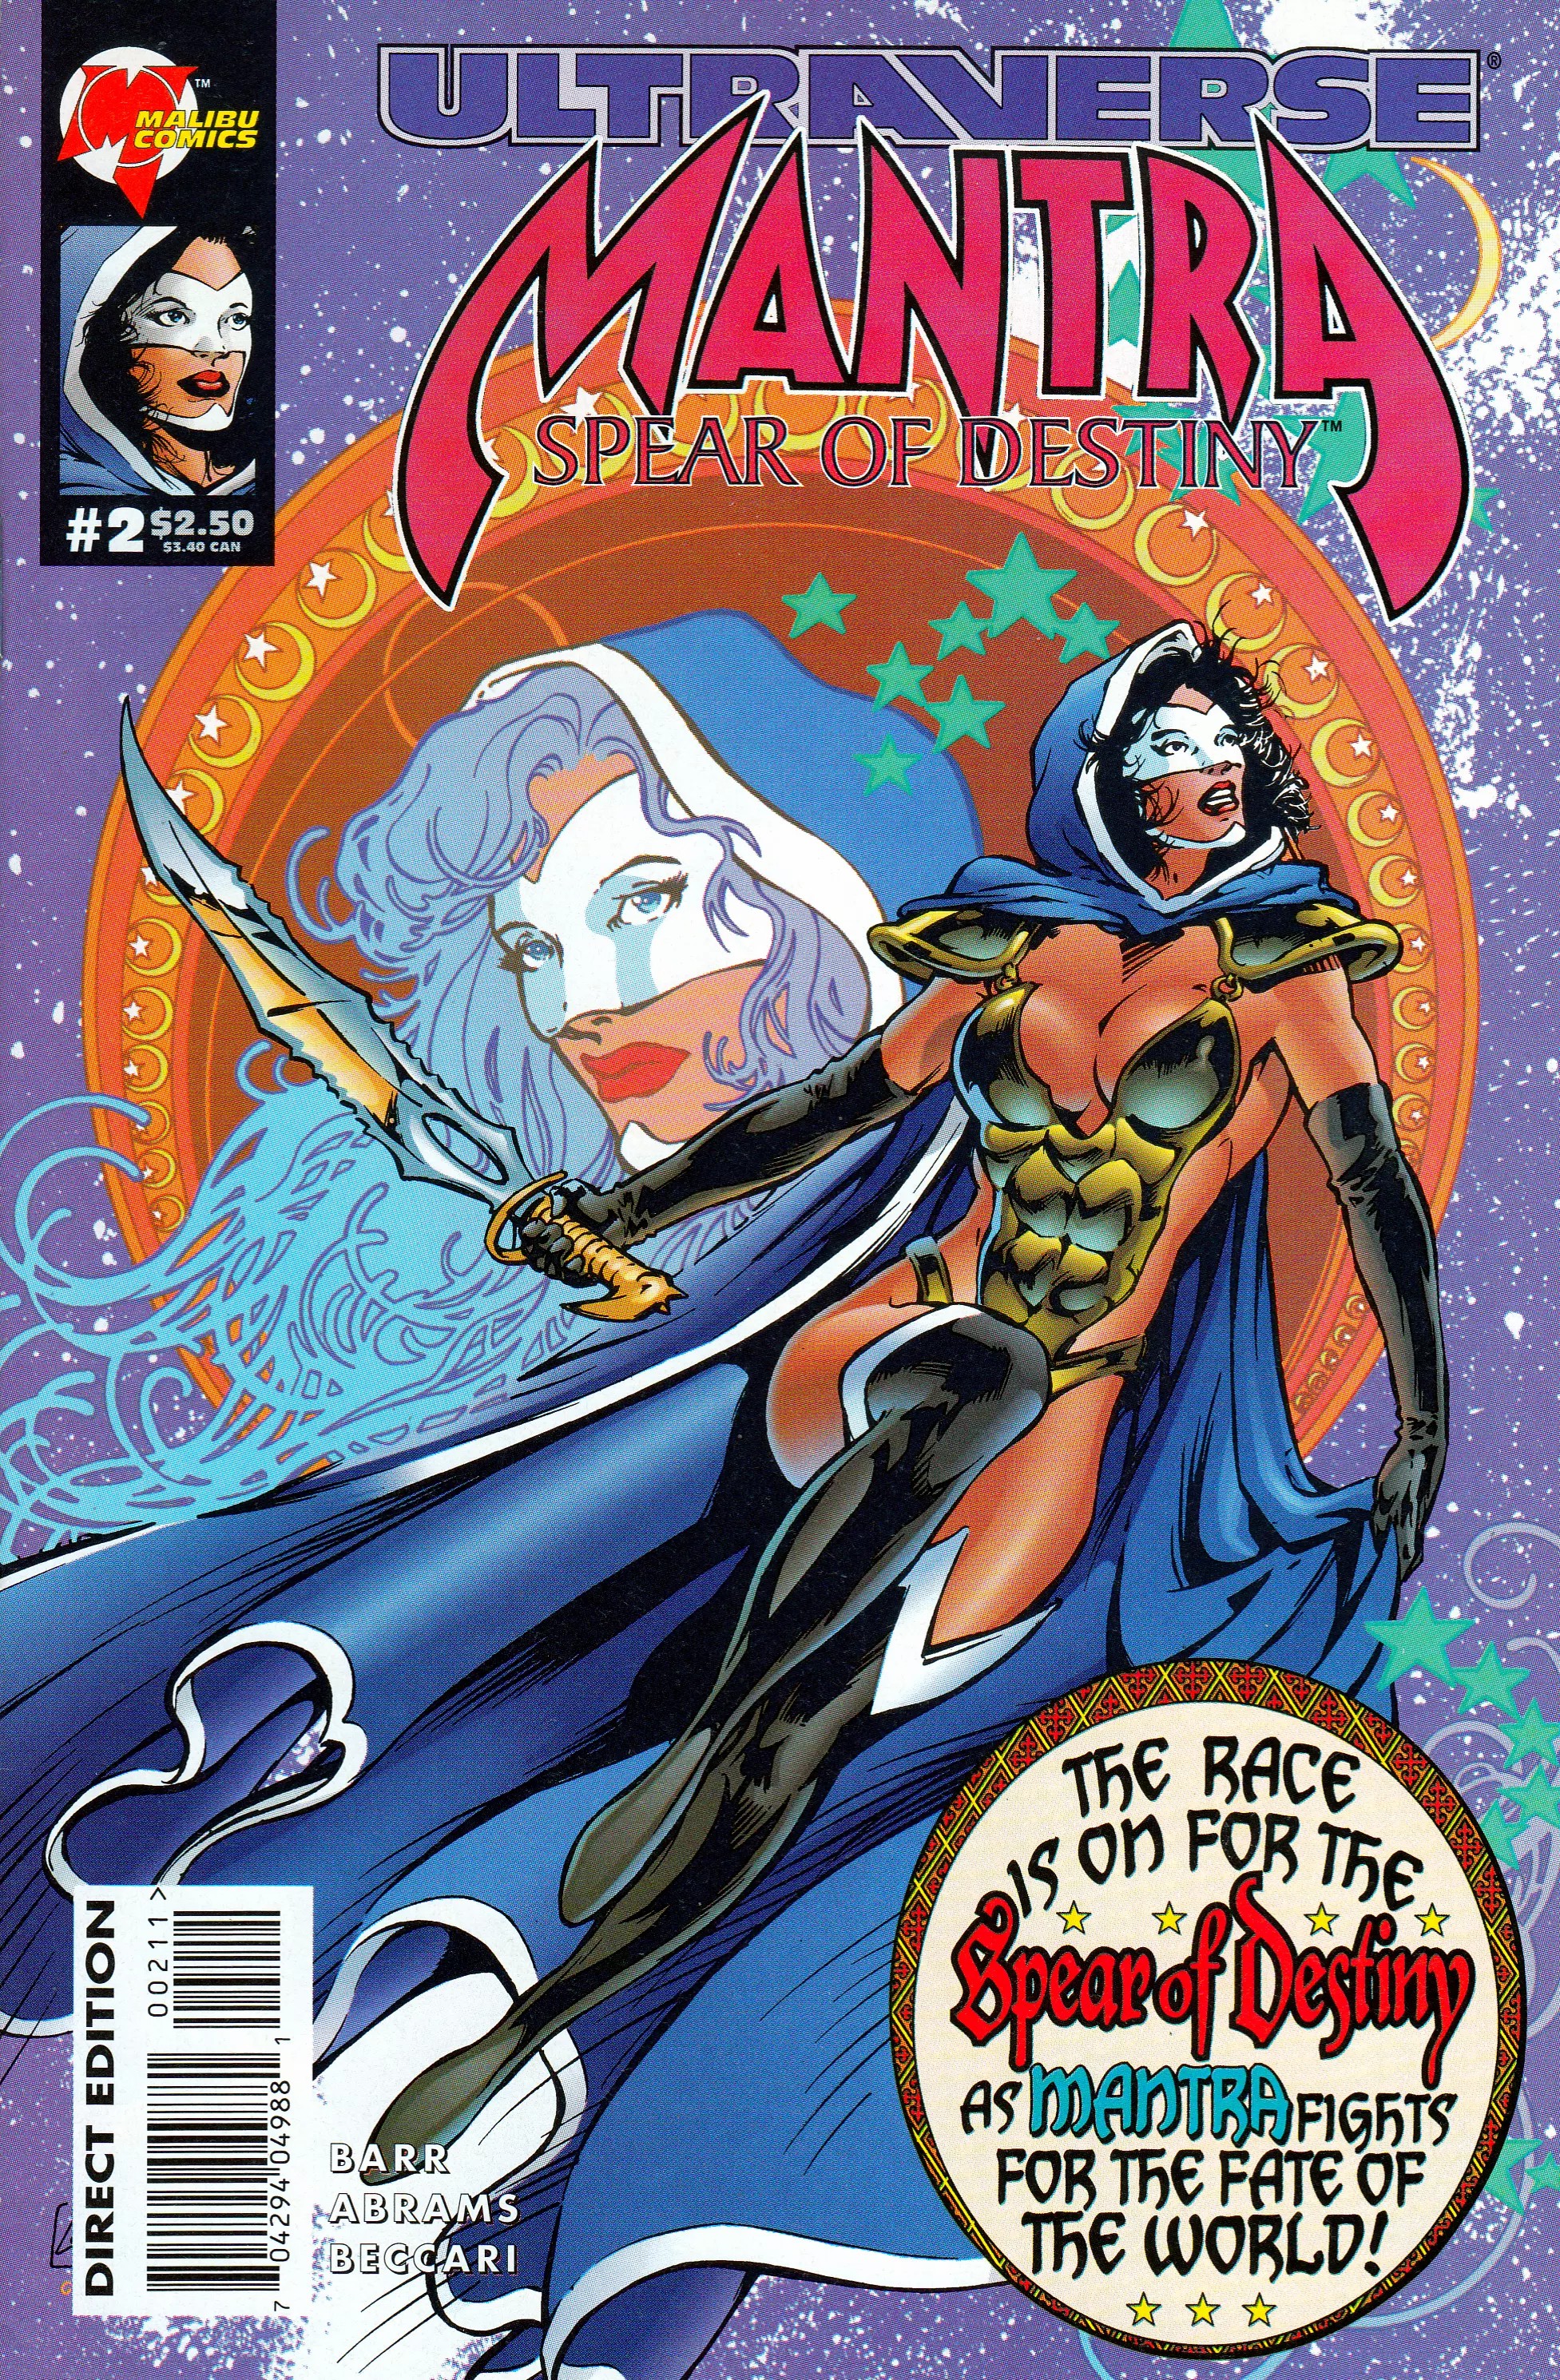 Read online Mantra: Spear of Destiny comic -  Issue #2 - 1